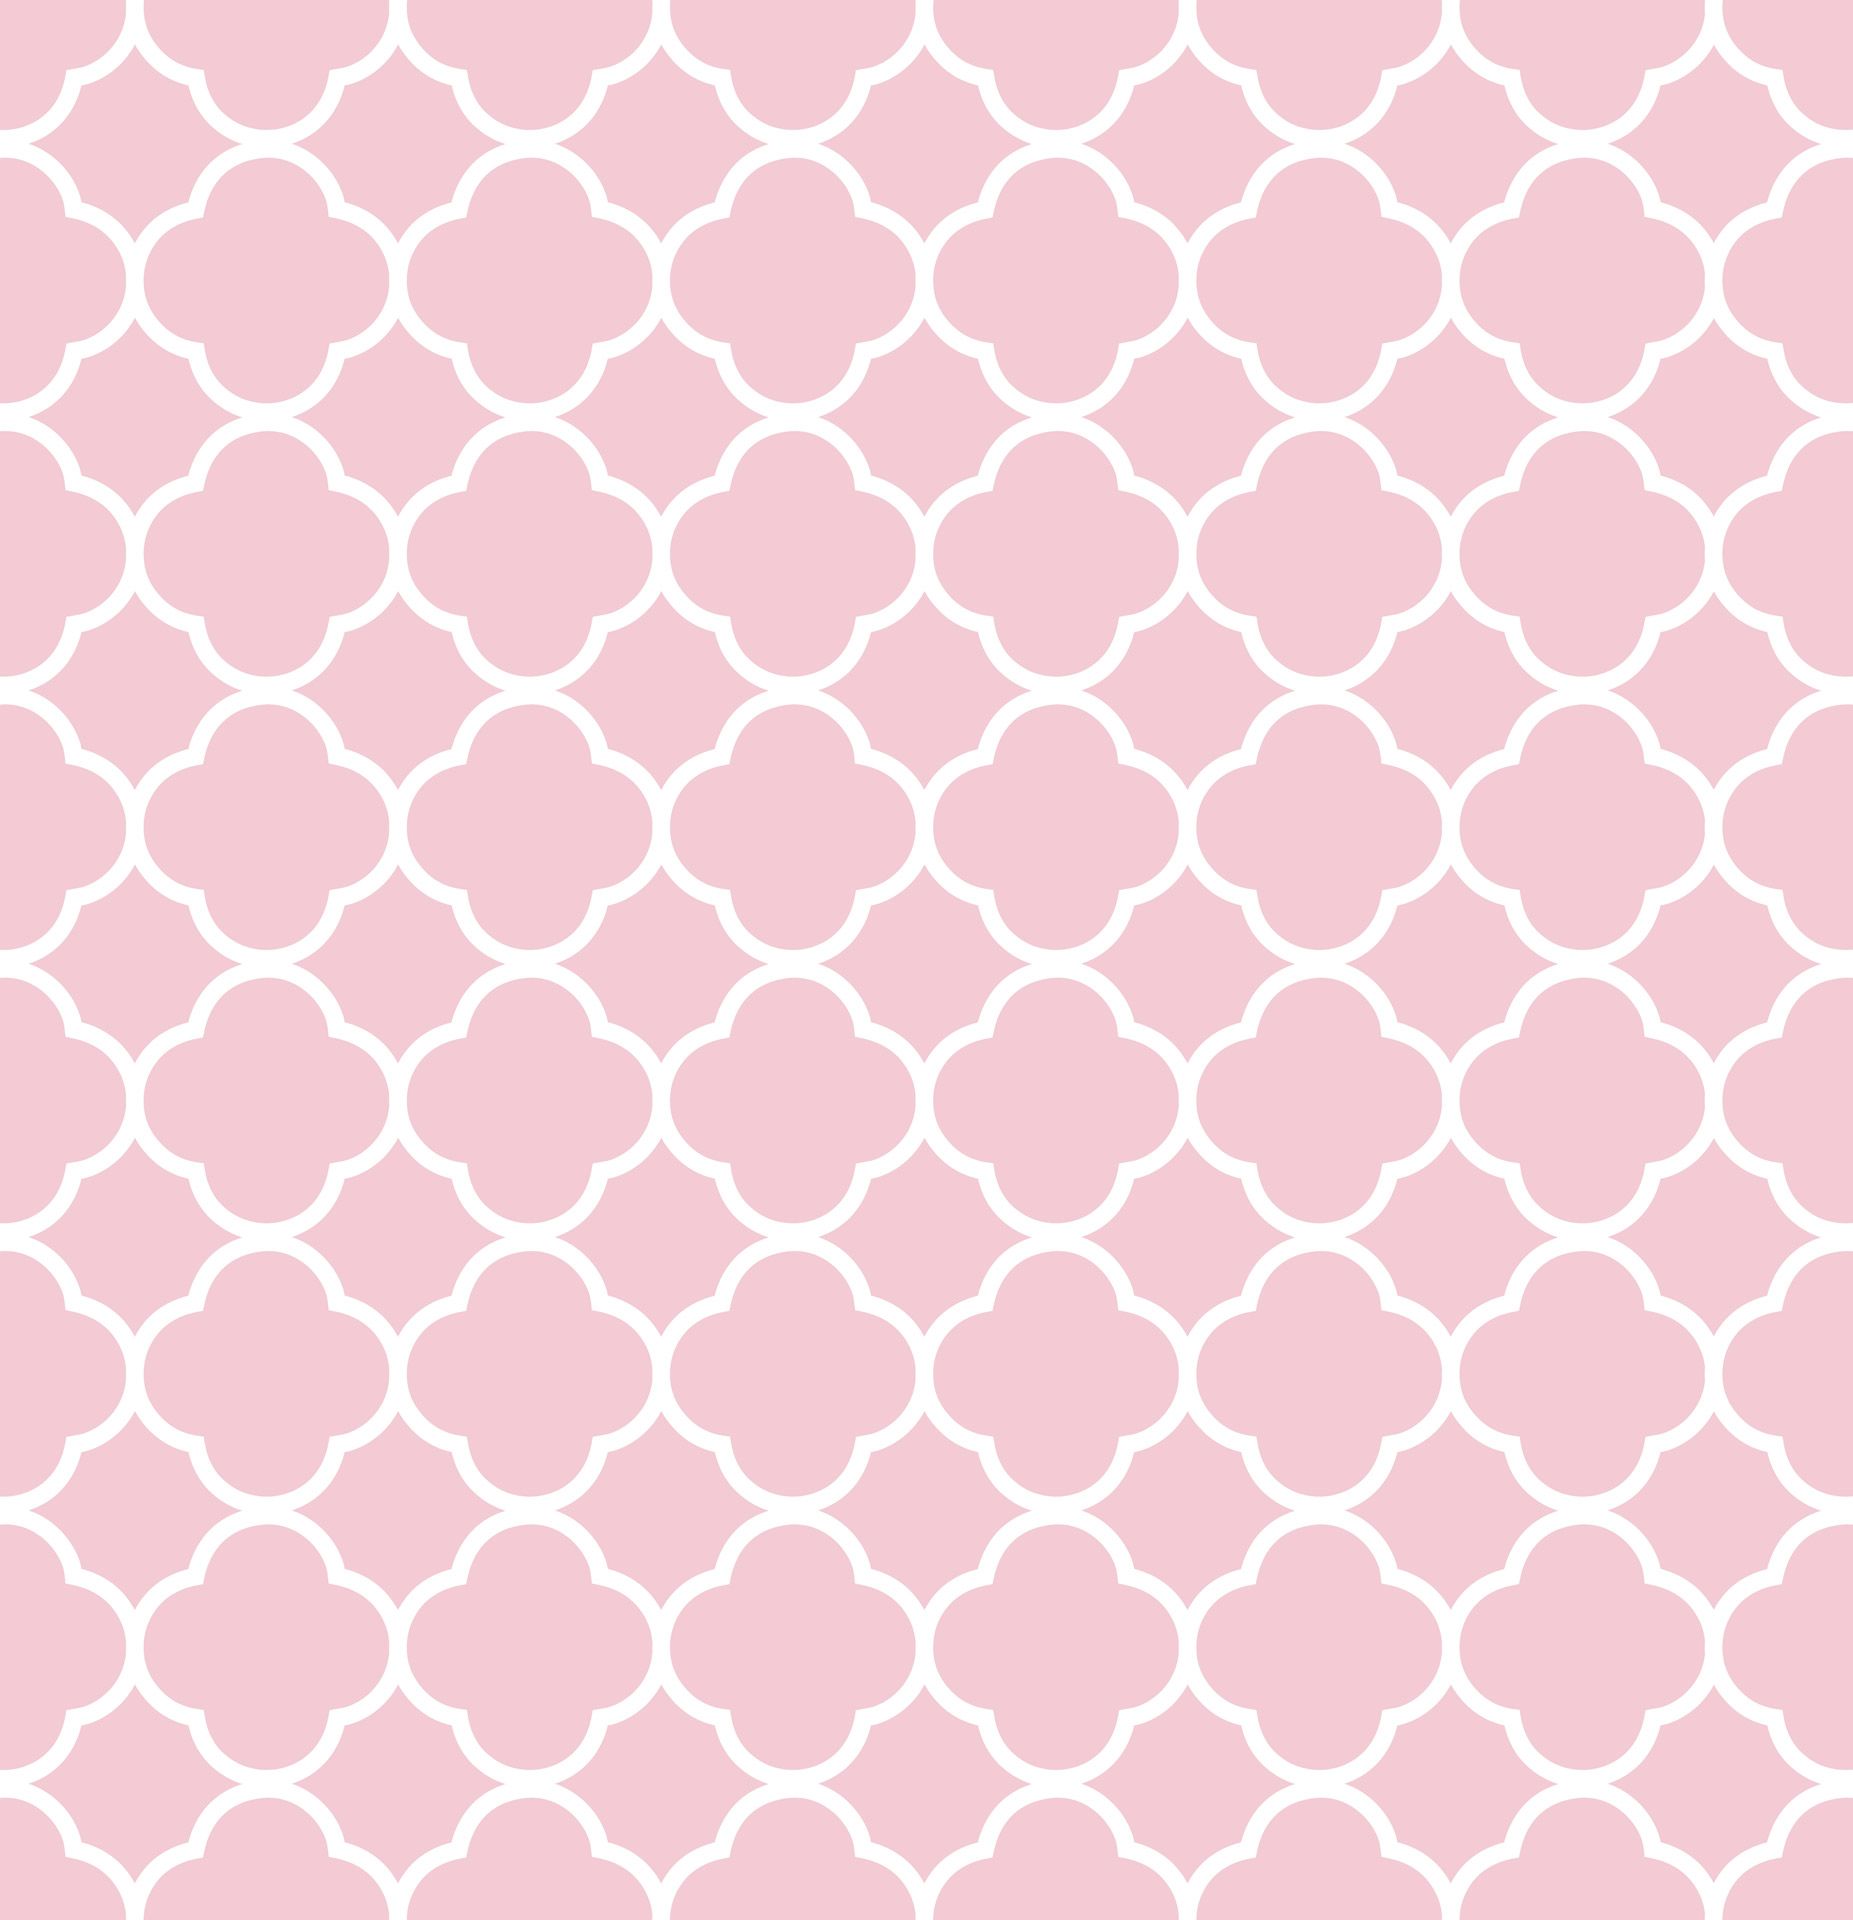 Background Images Patterns Pink For Computer Wall Design Steam Hd